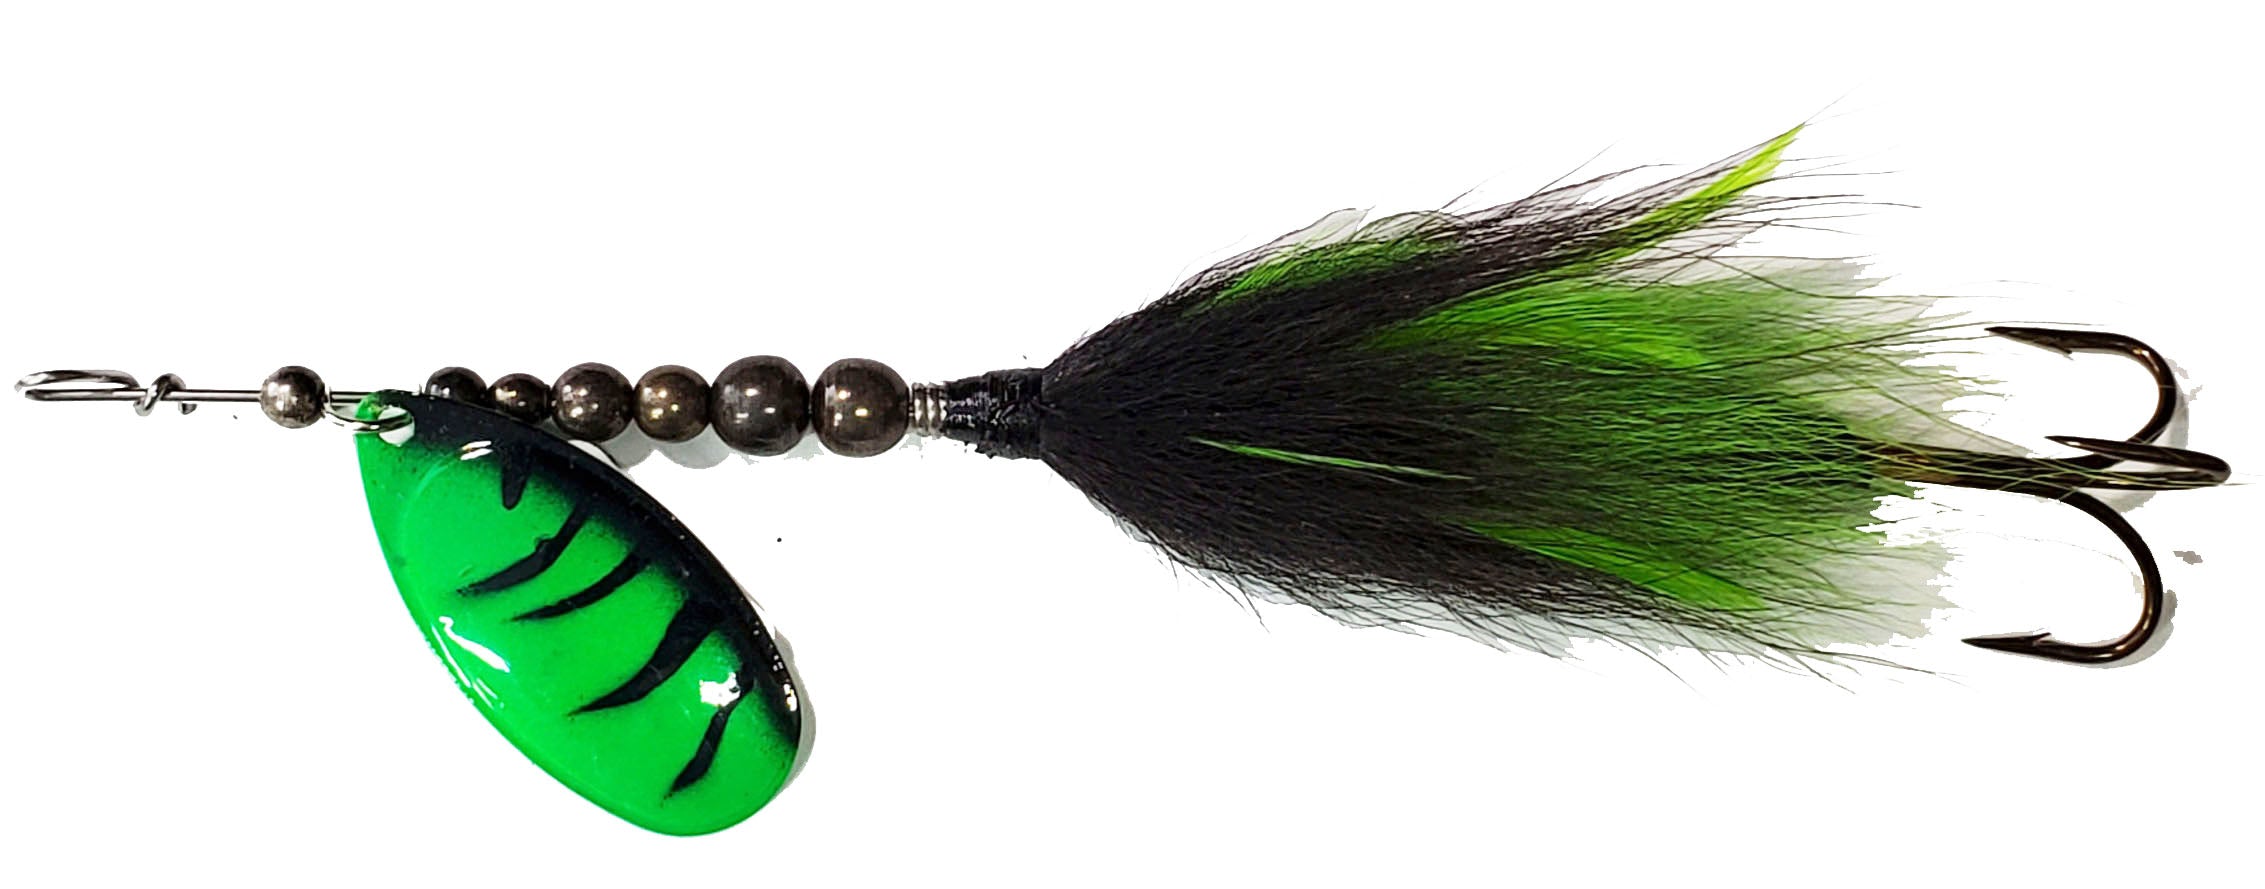 RJ Lures French Tail Bucktail Black Green